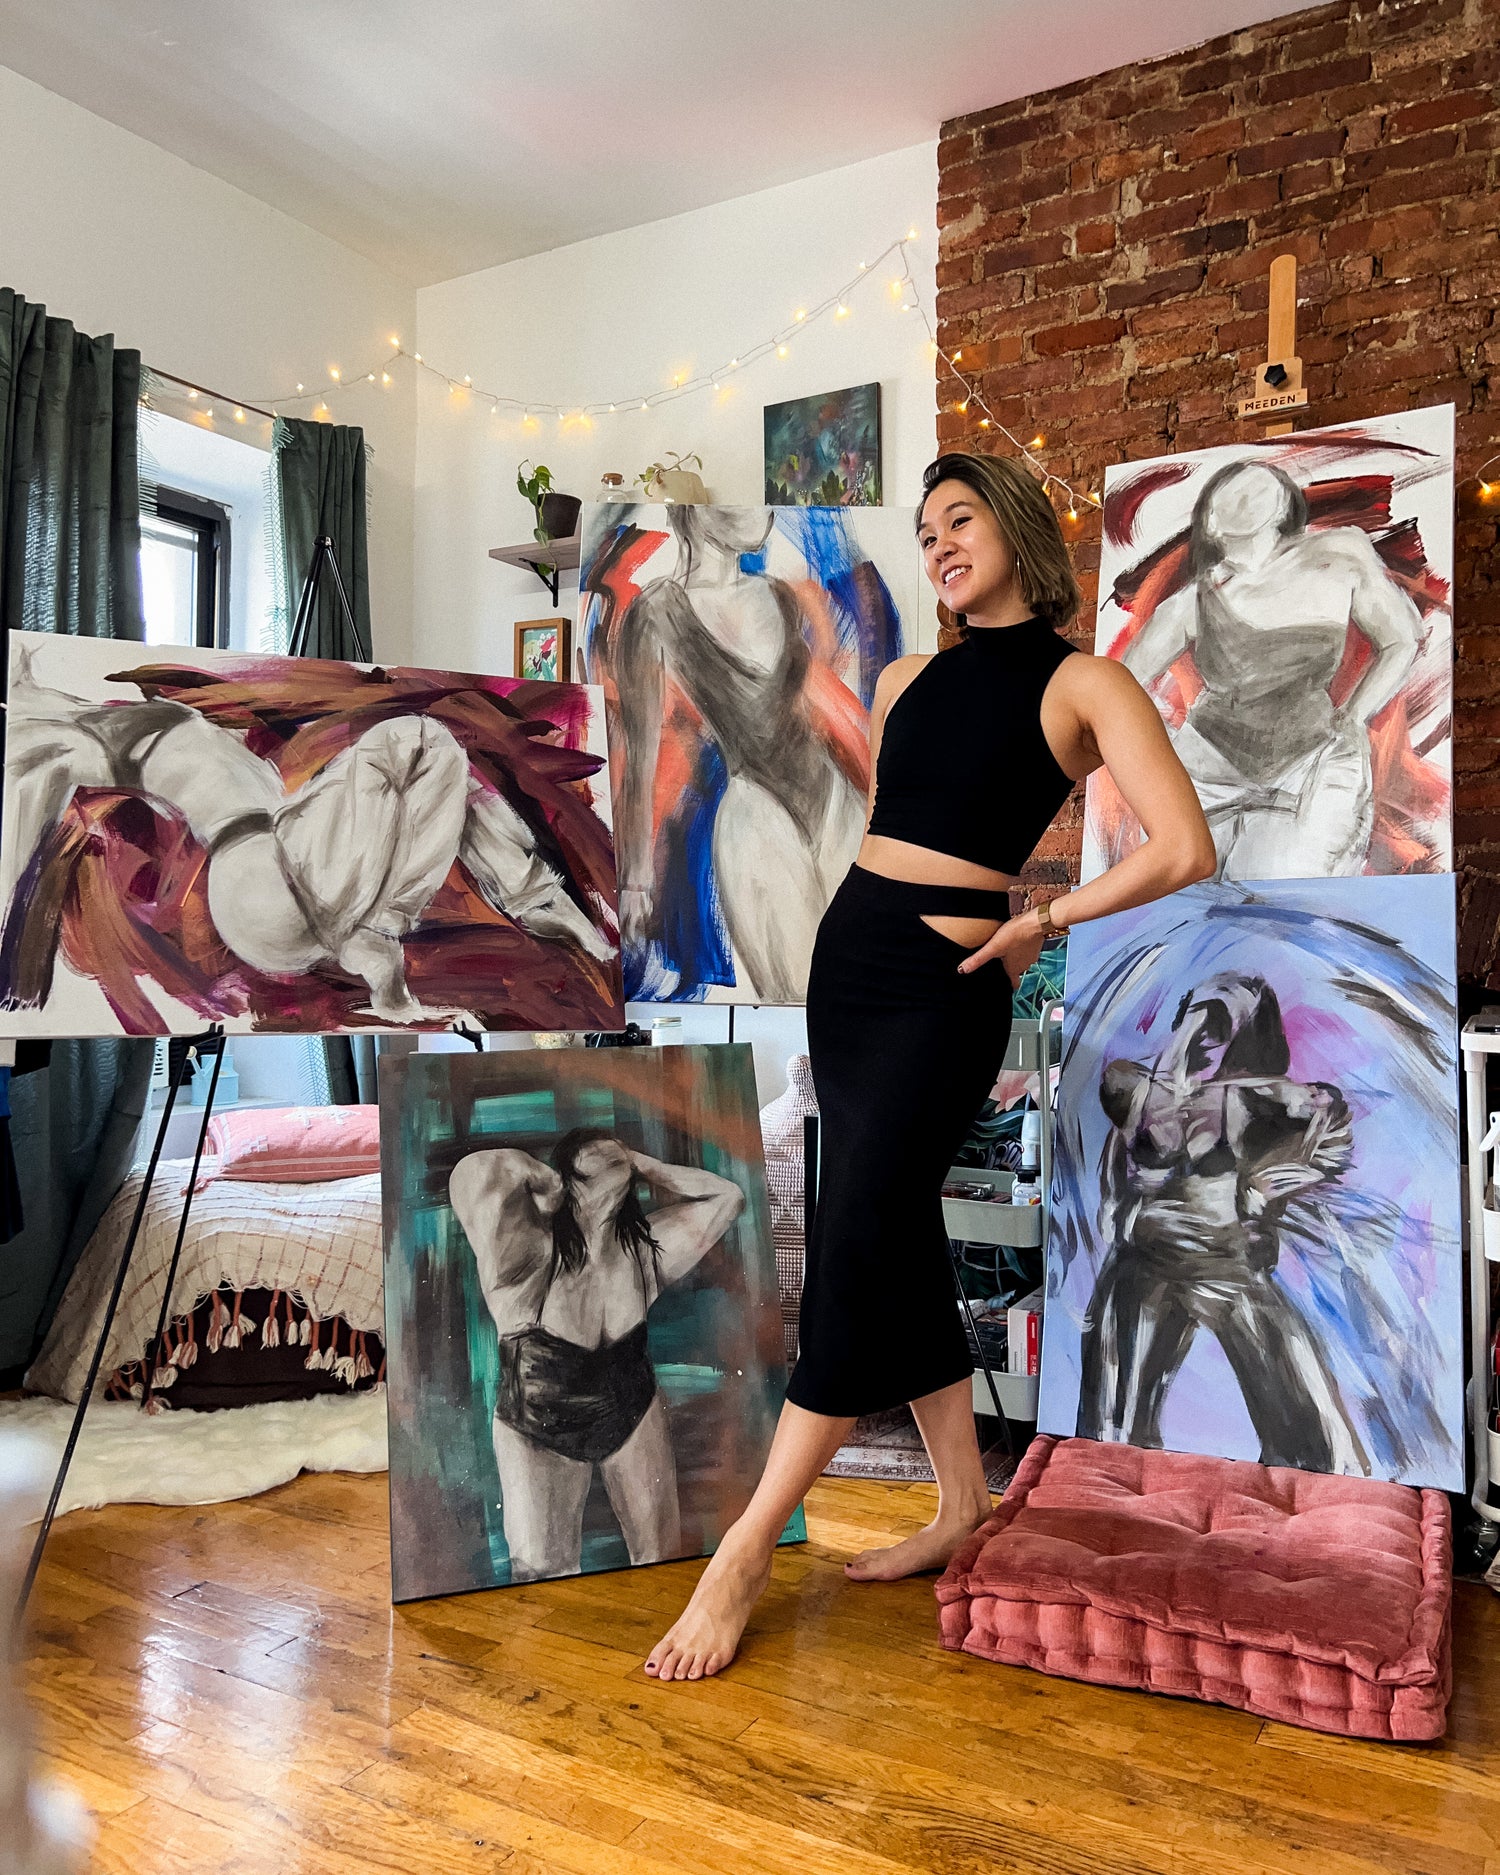 Bonnie standing and smiling in front of her paintings